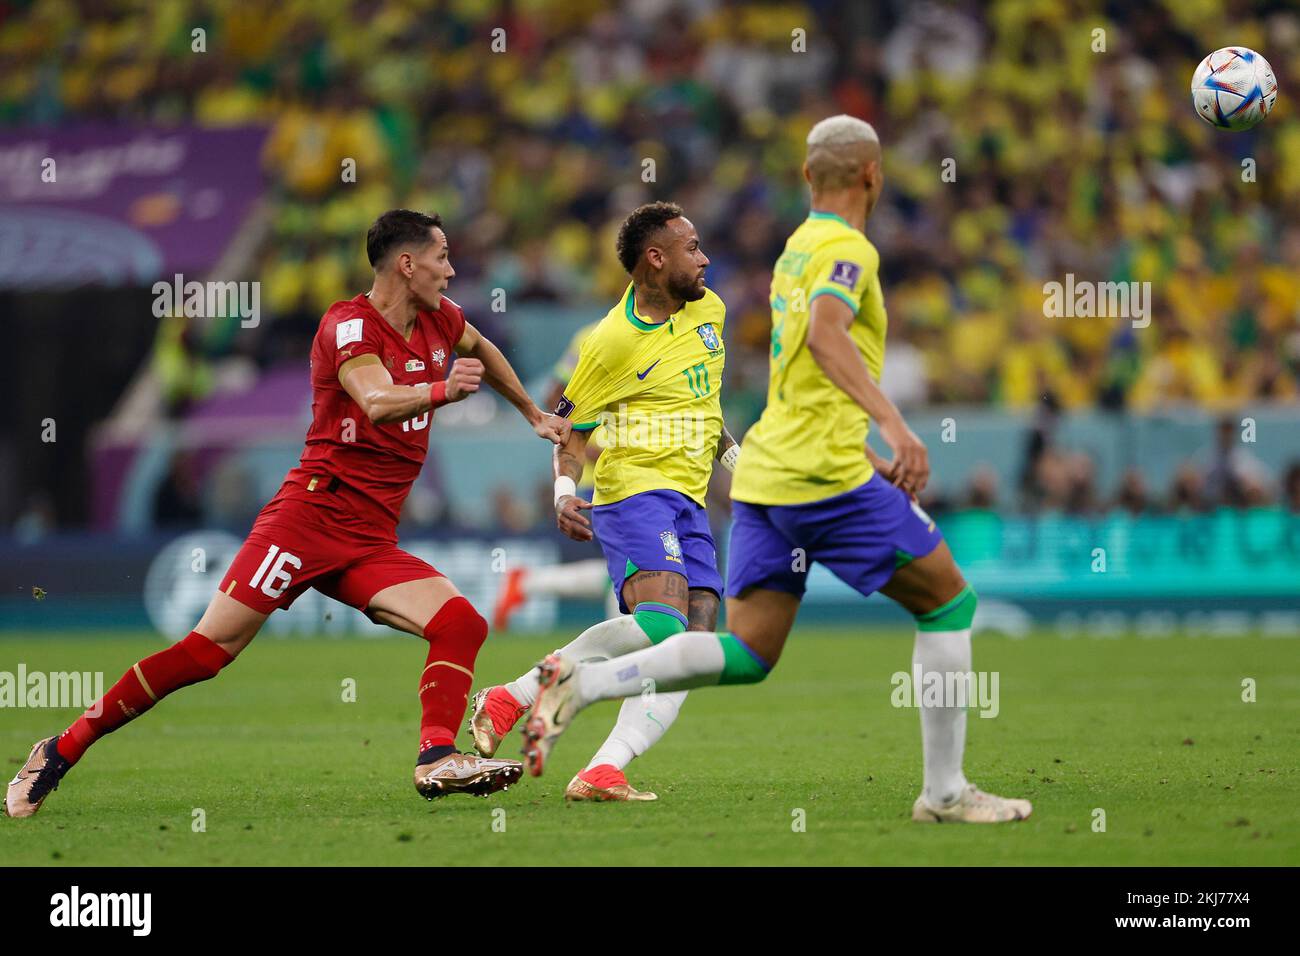 Lusail, Qatar. 24th Nov, 2022. Neymar (C) of Brazil competes with Sasa Lukic (L) of Serbia during the Group G match between Brazil and Serbia at the 2022 FIFA World Cup at Lusail Stadium in Lusail, Qatar, Nov. 24, 2022. Credit: Wang Lili/Xinhua/Alamy Live News Stock Photo